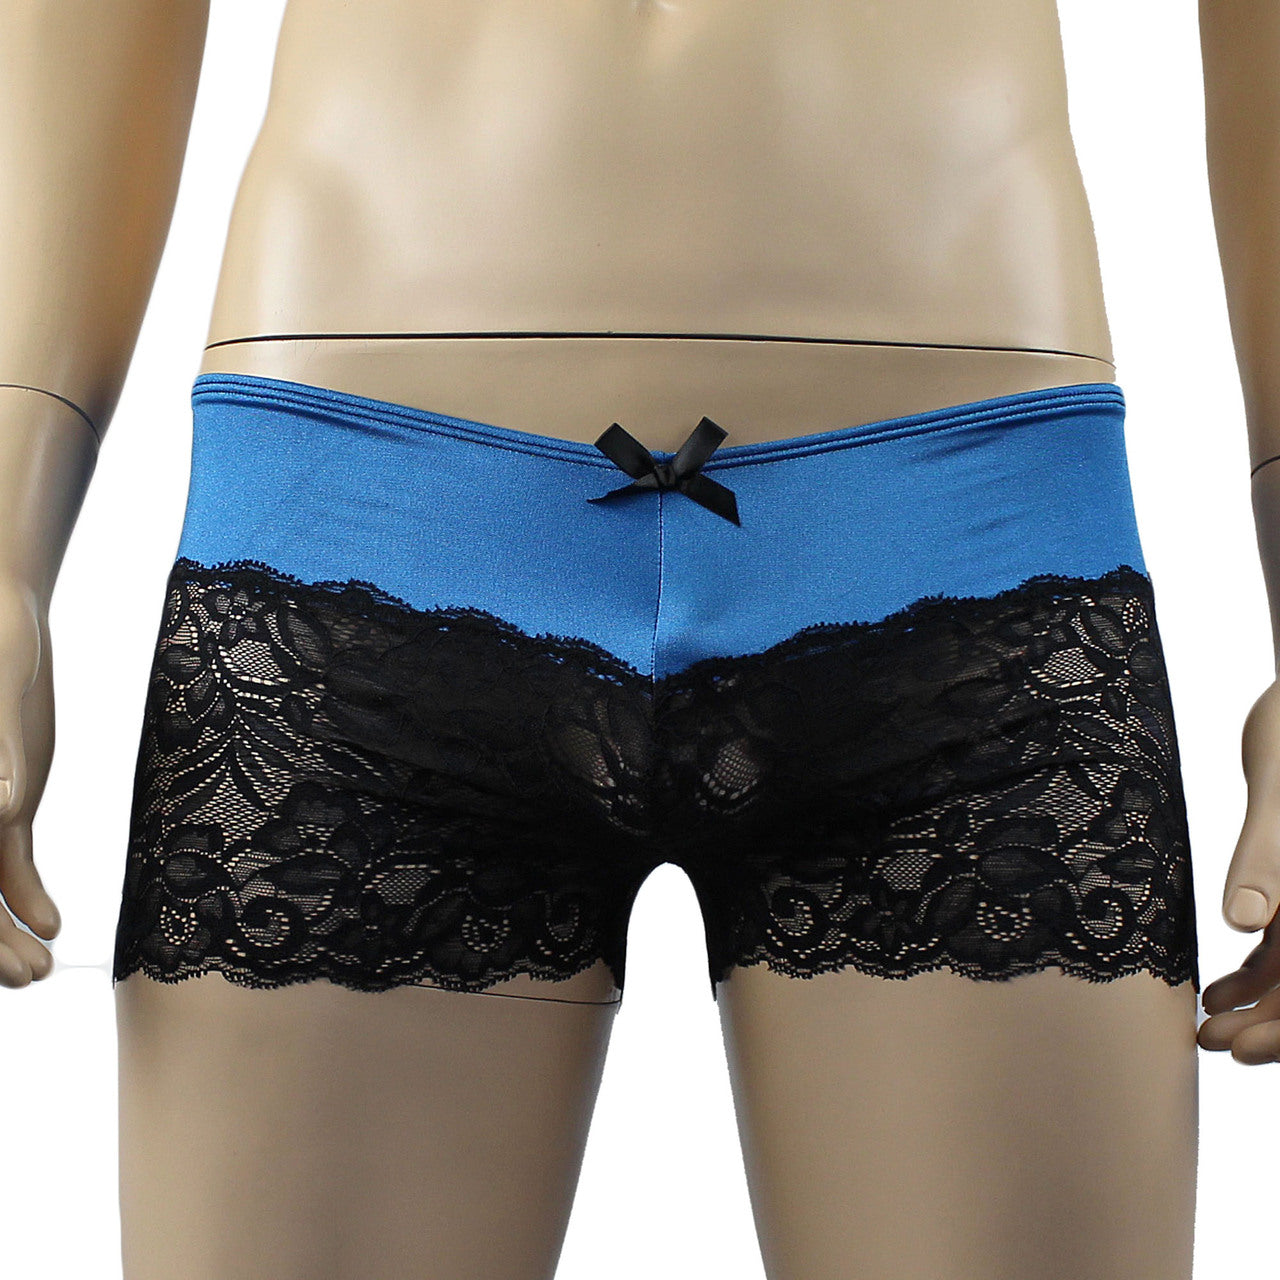 Mens Risque Boxer Briefs with Detachable Garters & Stockings Teal and Black Lace